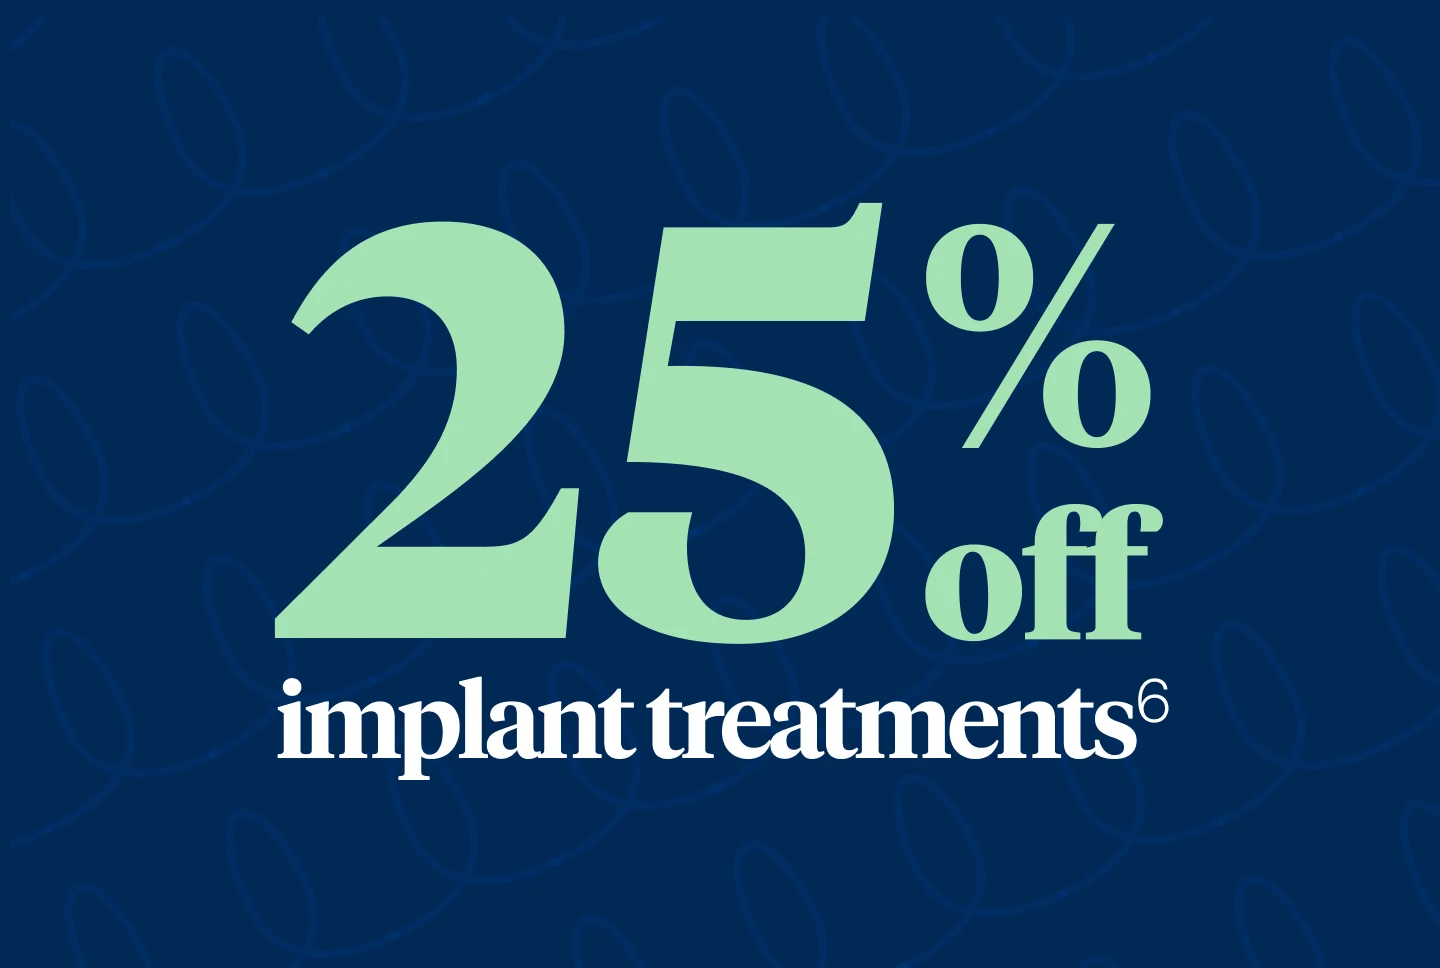 25% off implant treatments. 